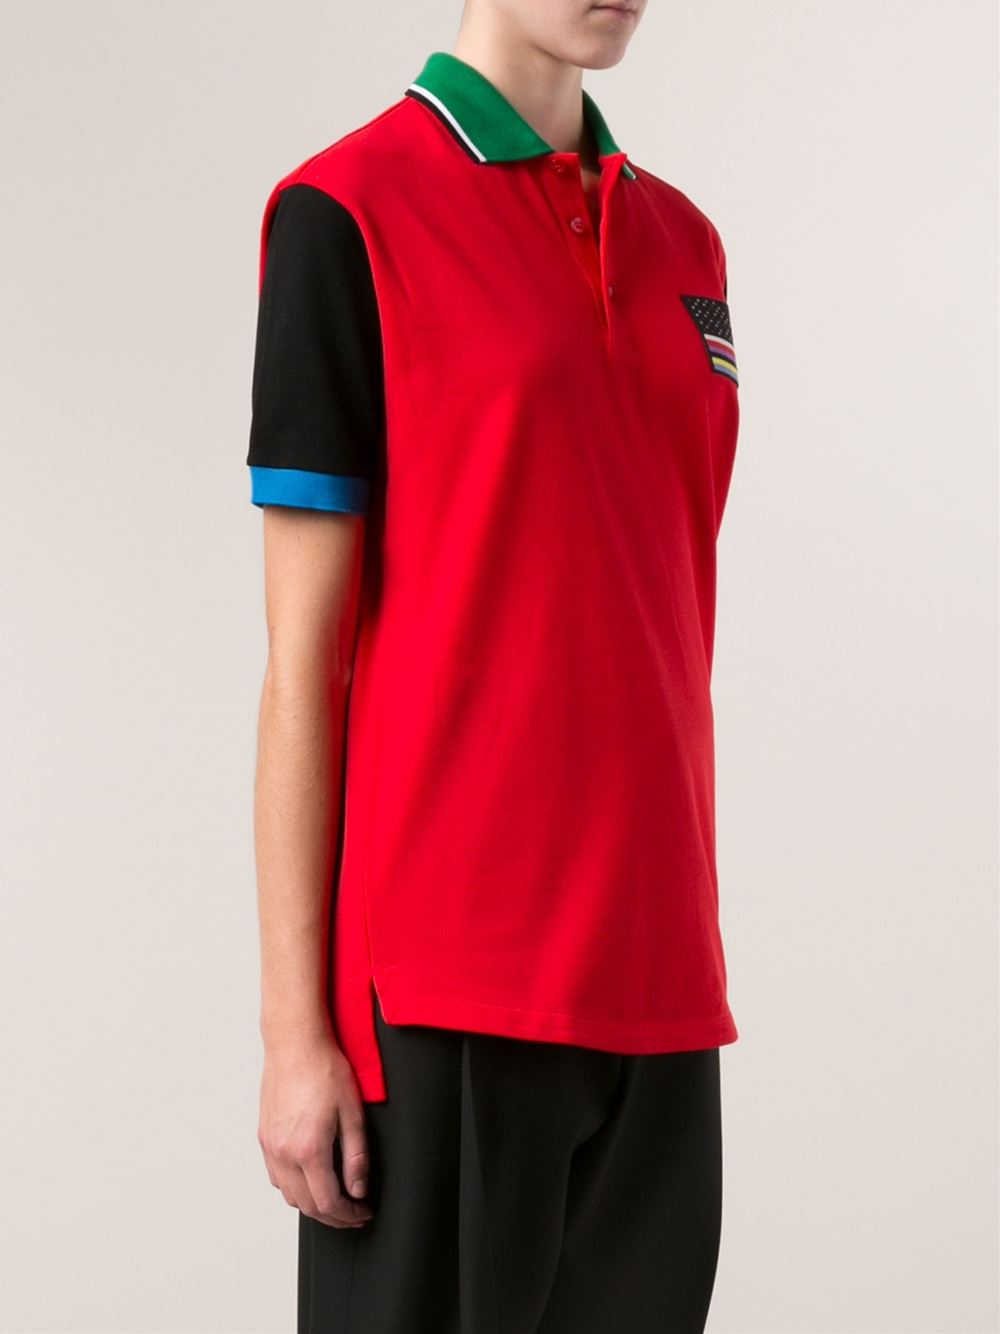 Givenchy Embroidered American Flag Polo Shirt in Red | Lyst